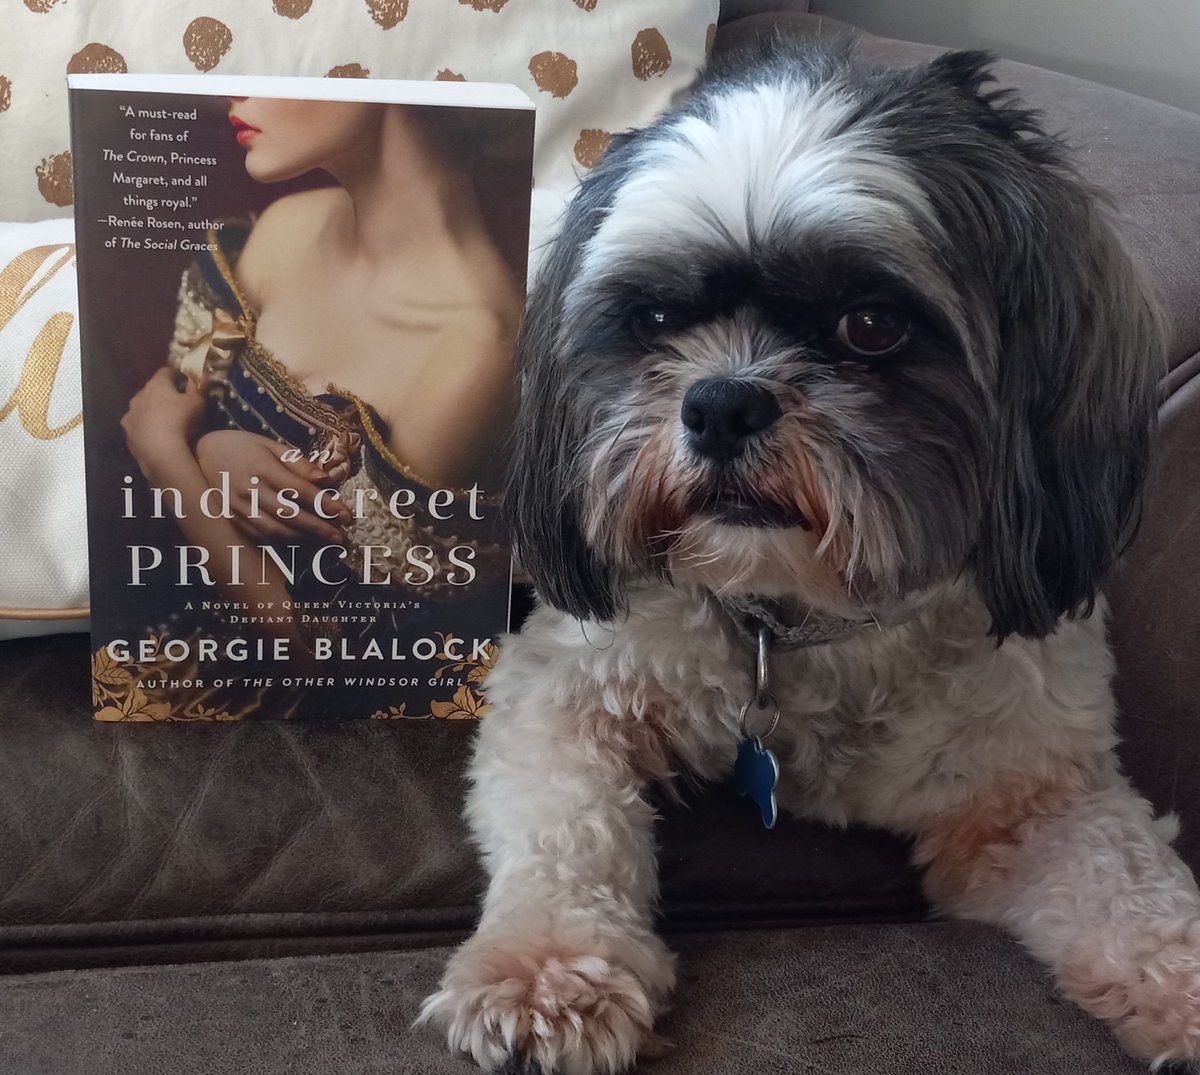 M writing partner wants you to know that AN INDISCREET PRINCESS on Kindle is $1.99 until 4/18. Add it to your summer reading list!

#kindle #kindledeal #kindlesalealert #kindlesale #booksale #shihtzu #dog